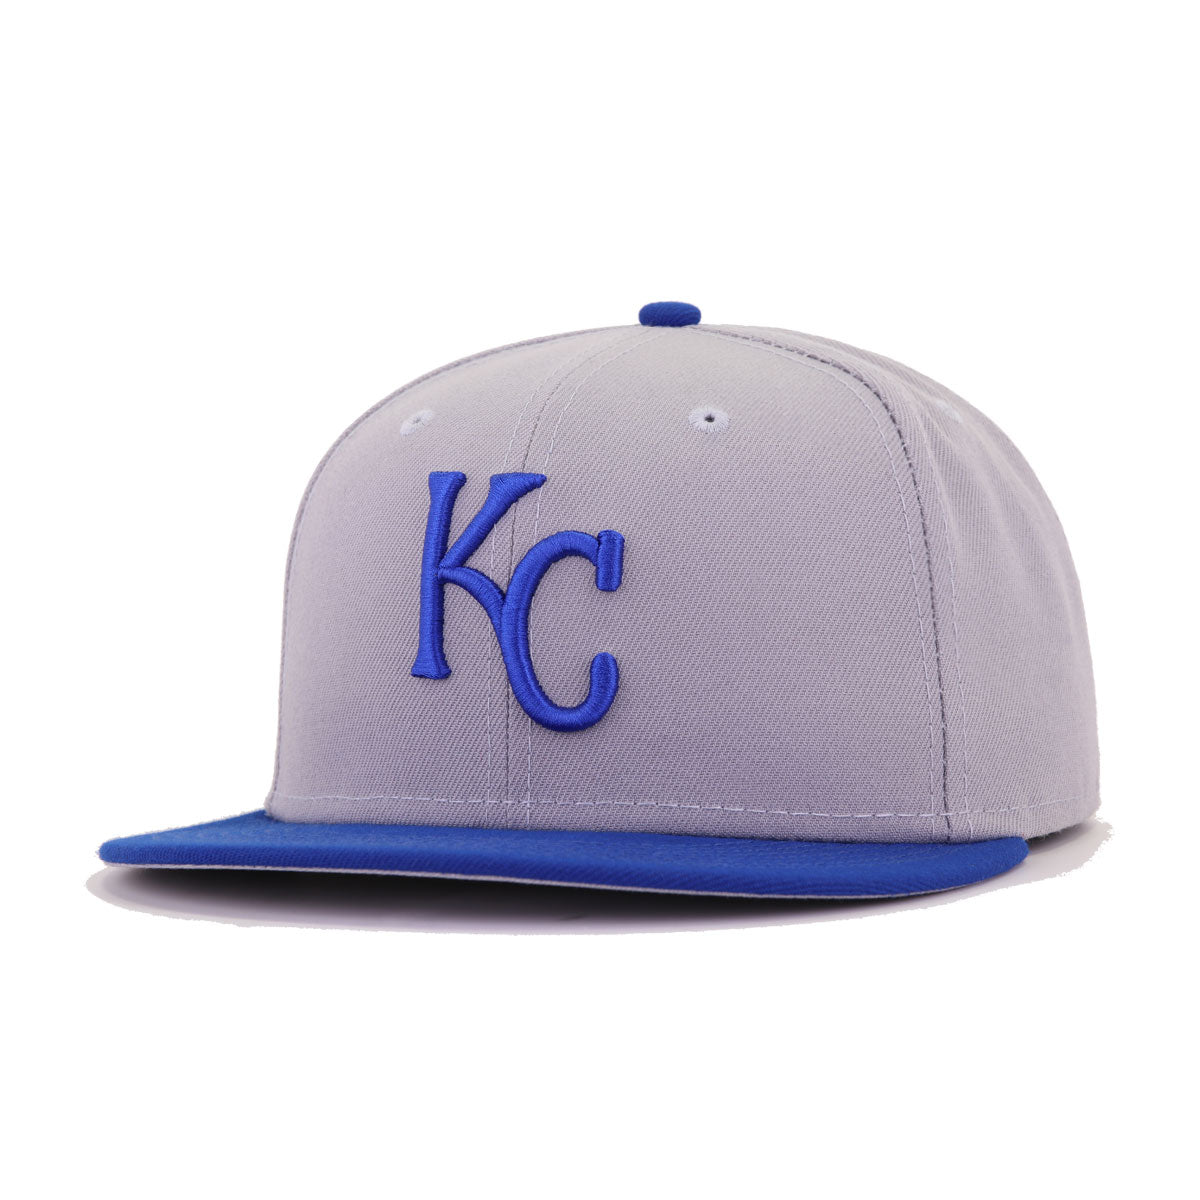 New Era 59Fifty San Diego Clippers Black, Silver, Royal Blue